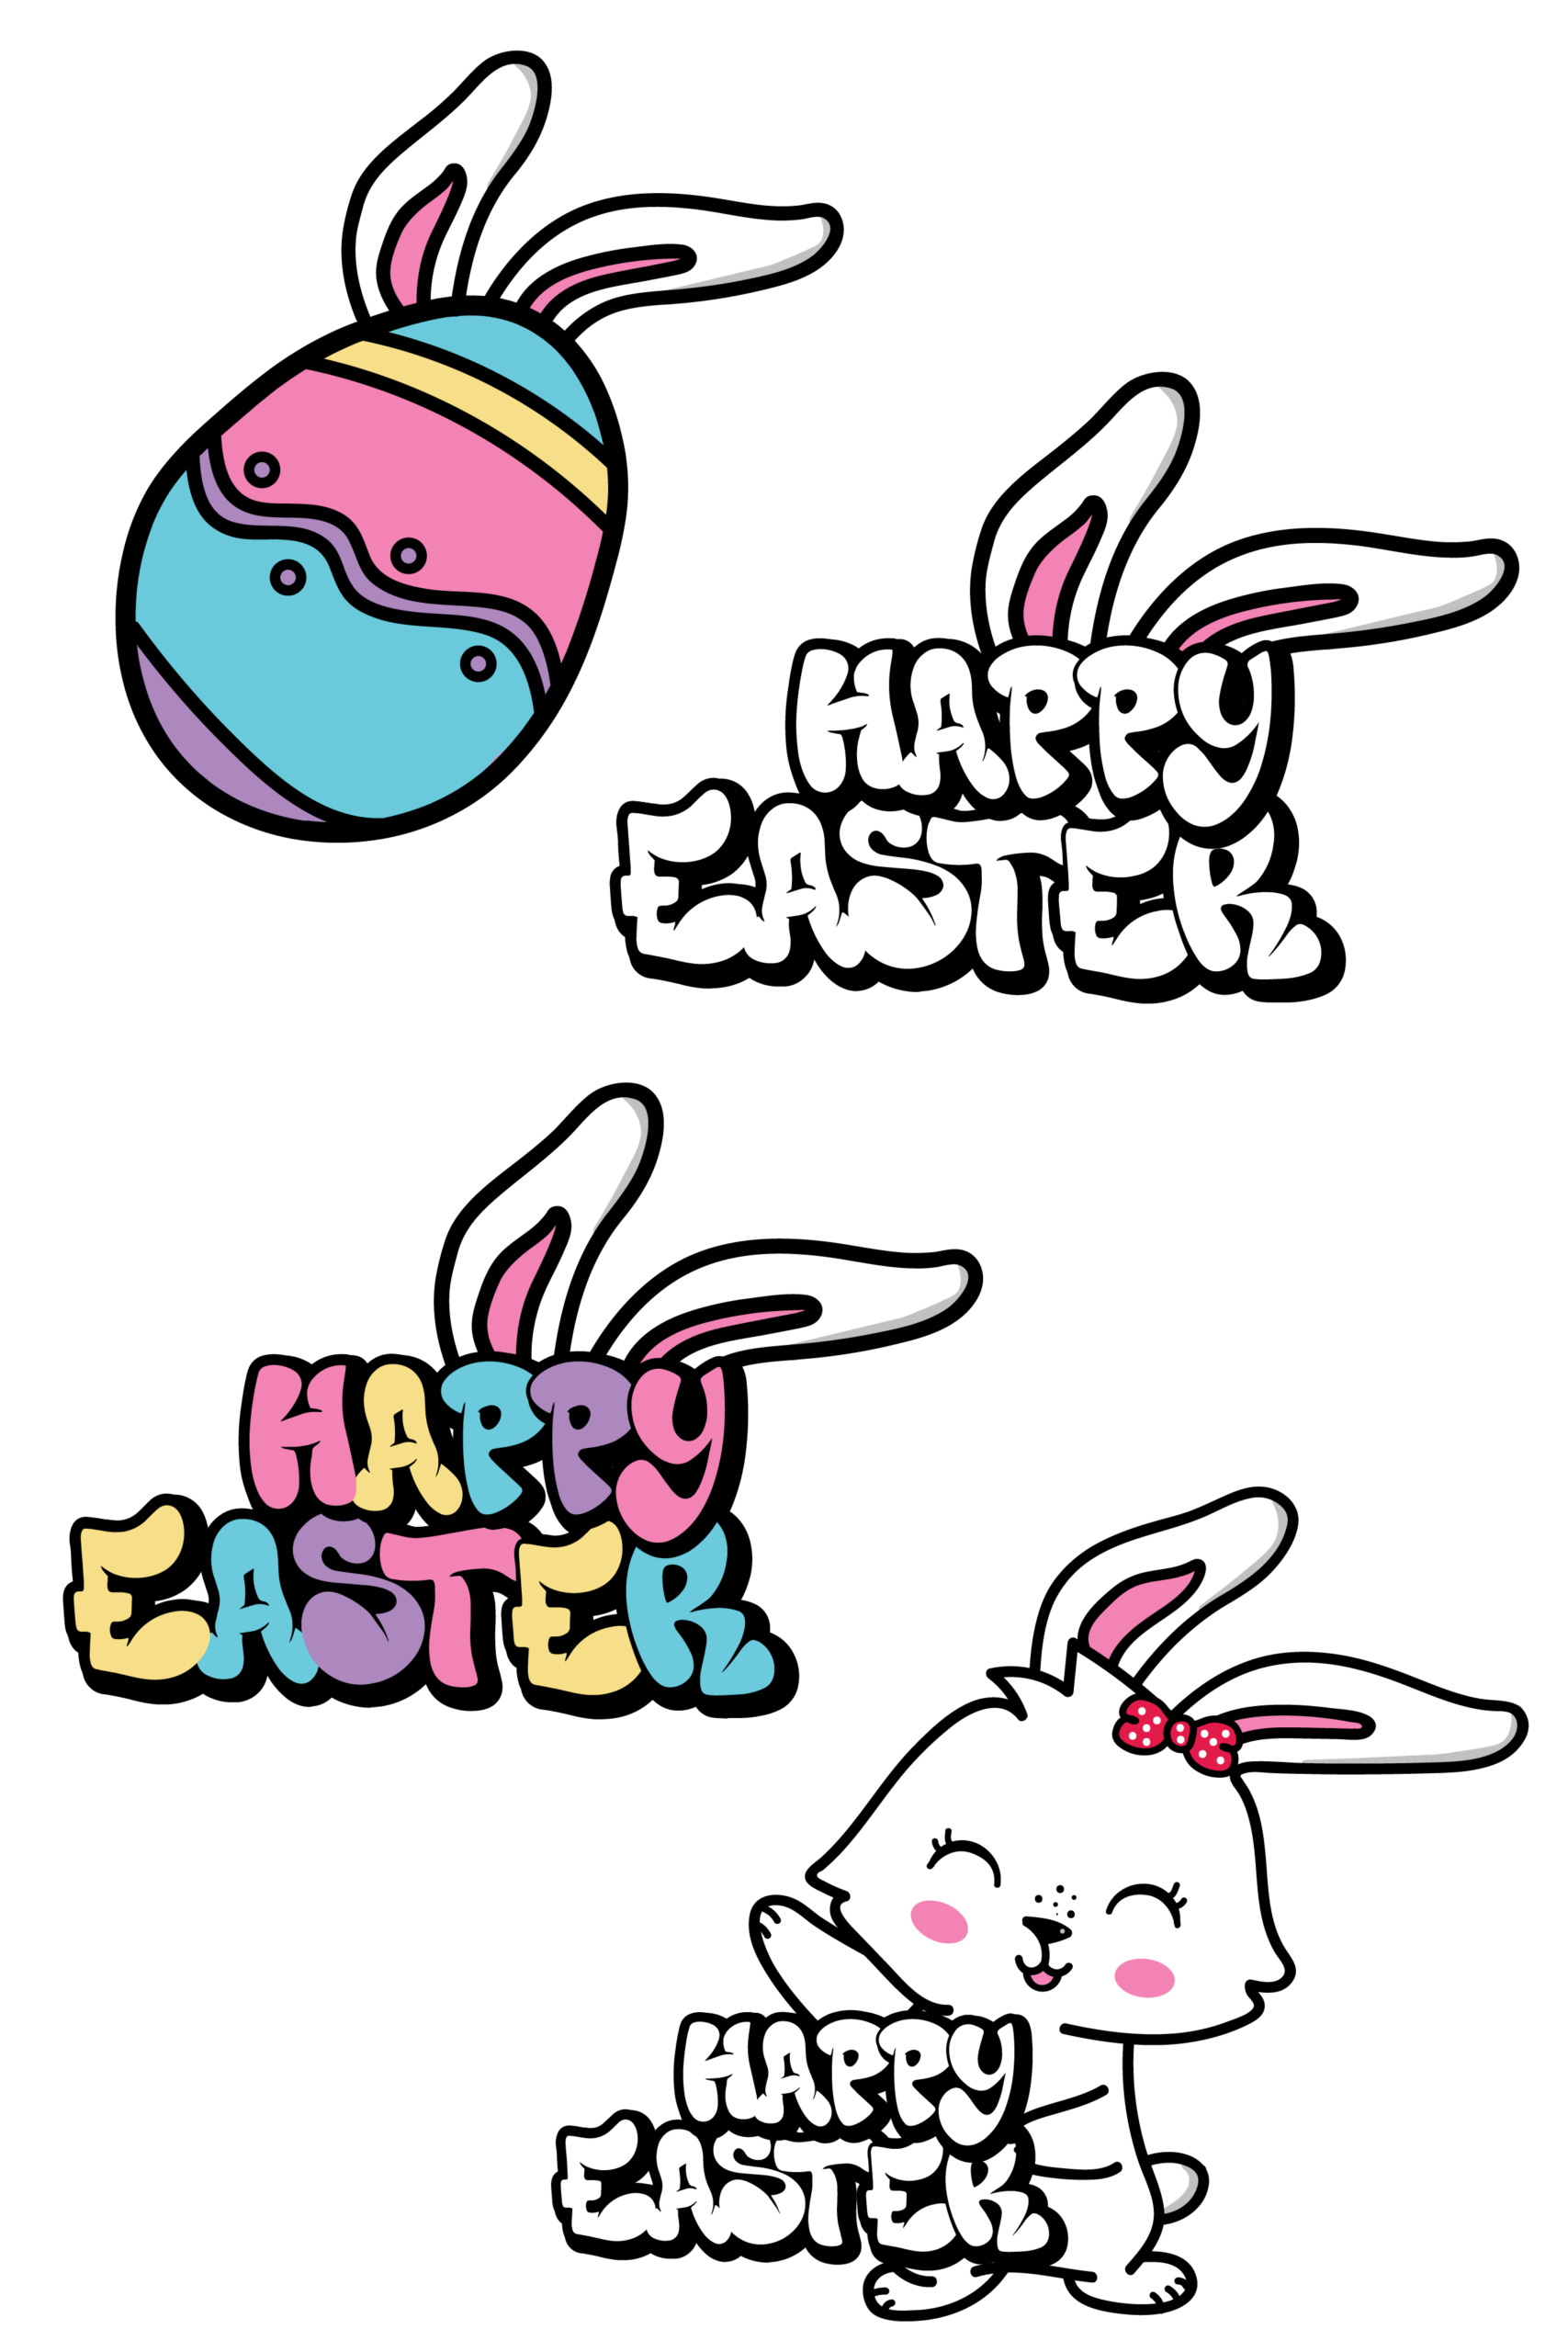 Happy Easter with Bunny Stencil Design - SVG FILE ONLY